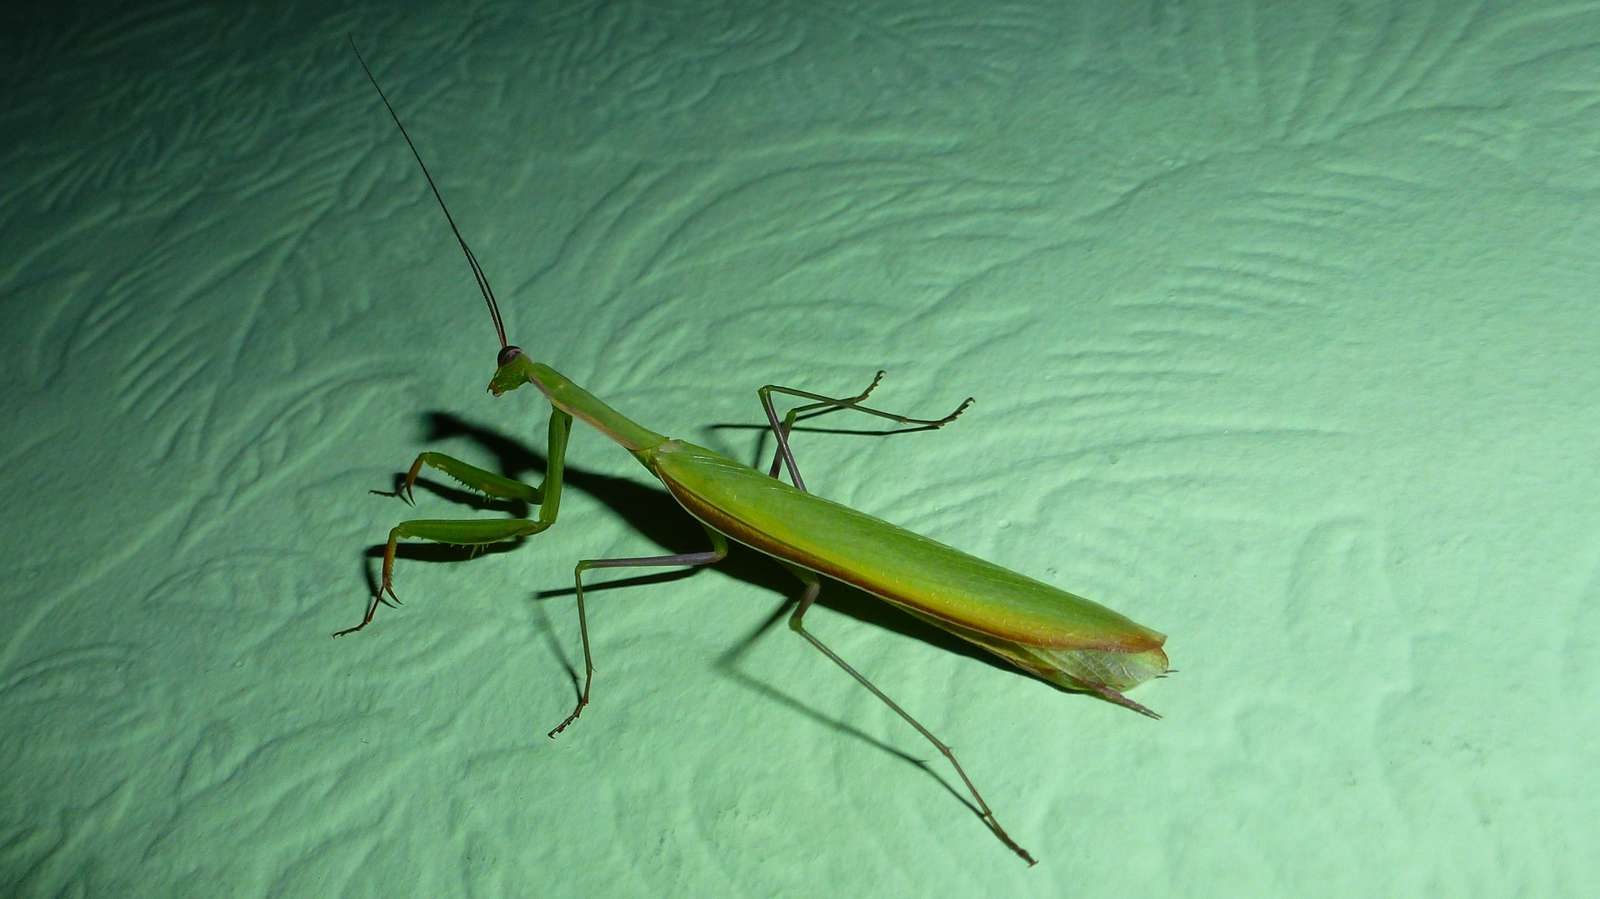 Praying mantis on the wall jigsaw puzzle online